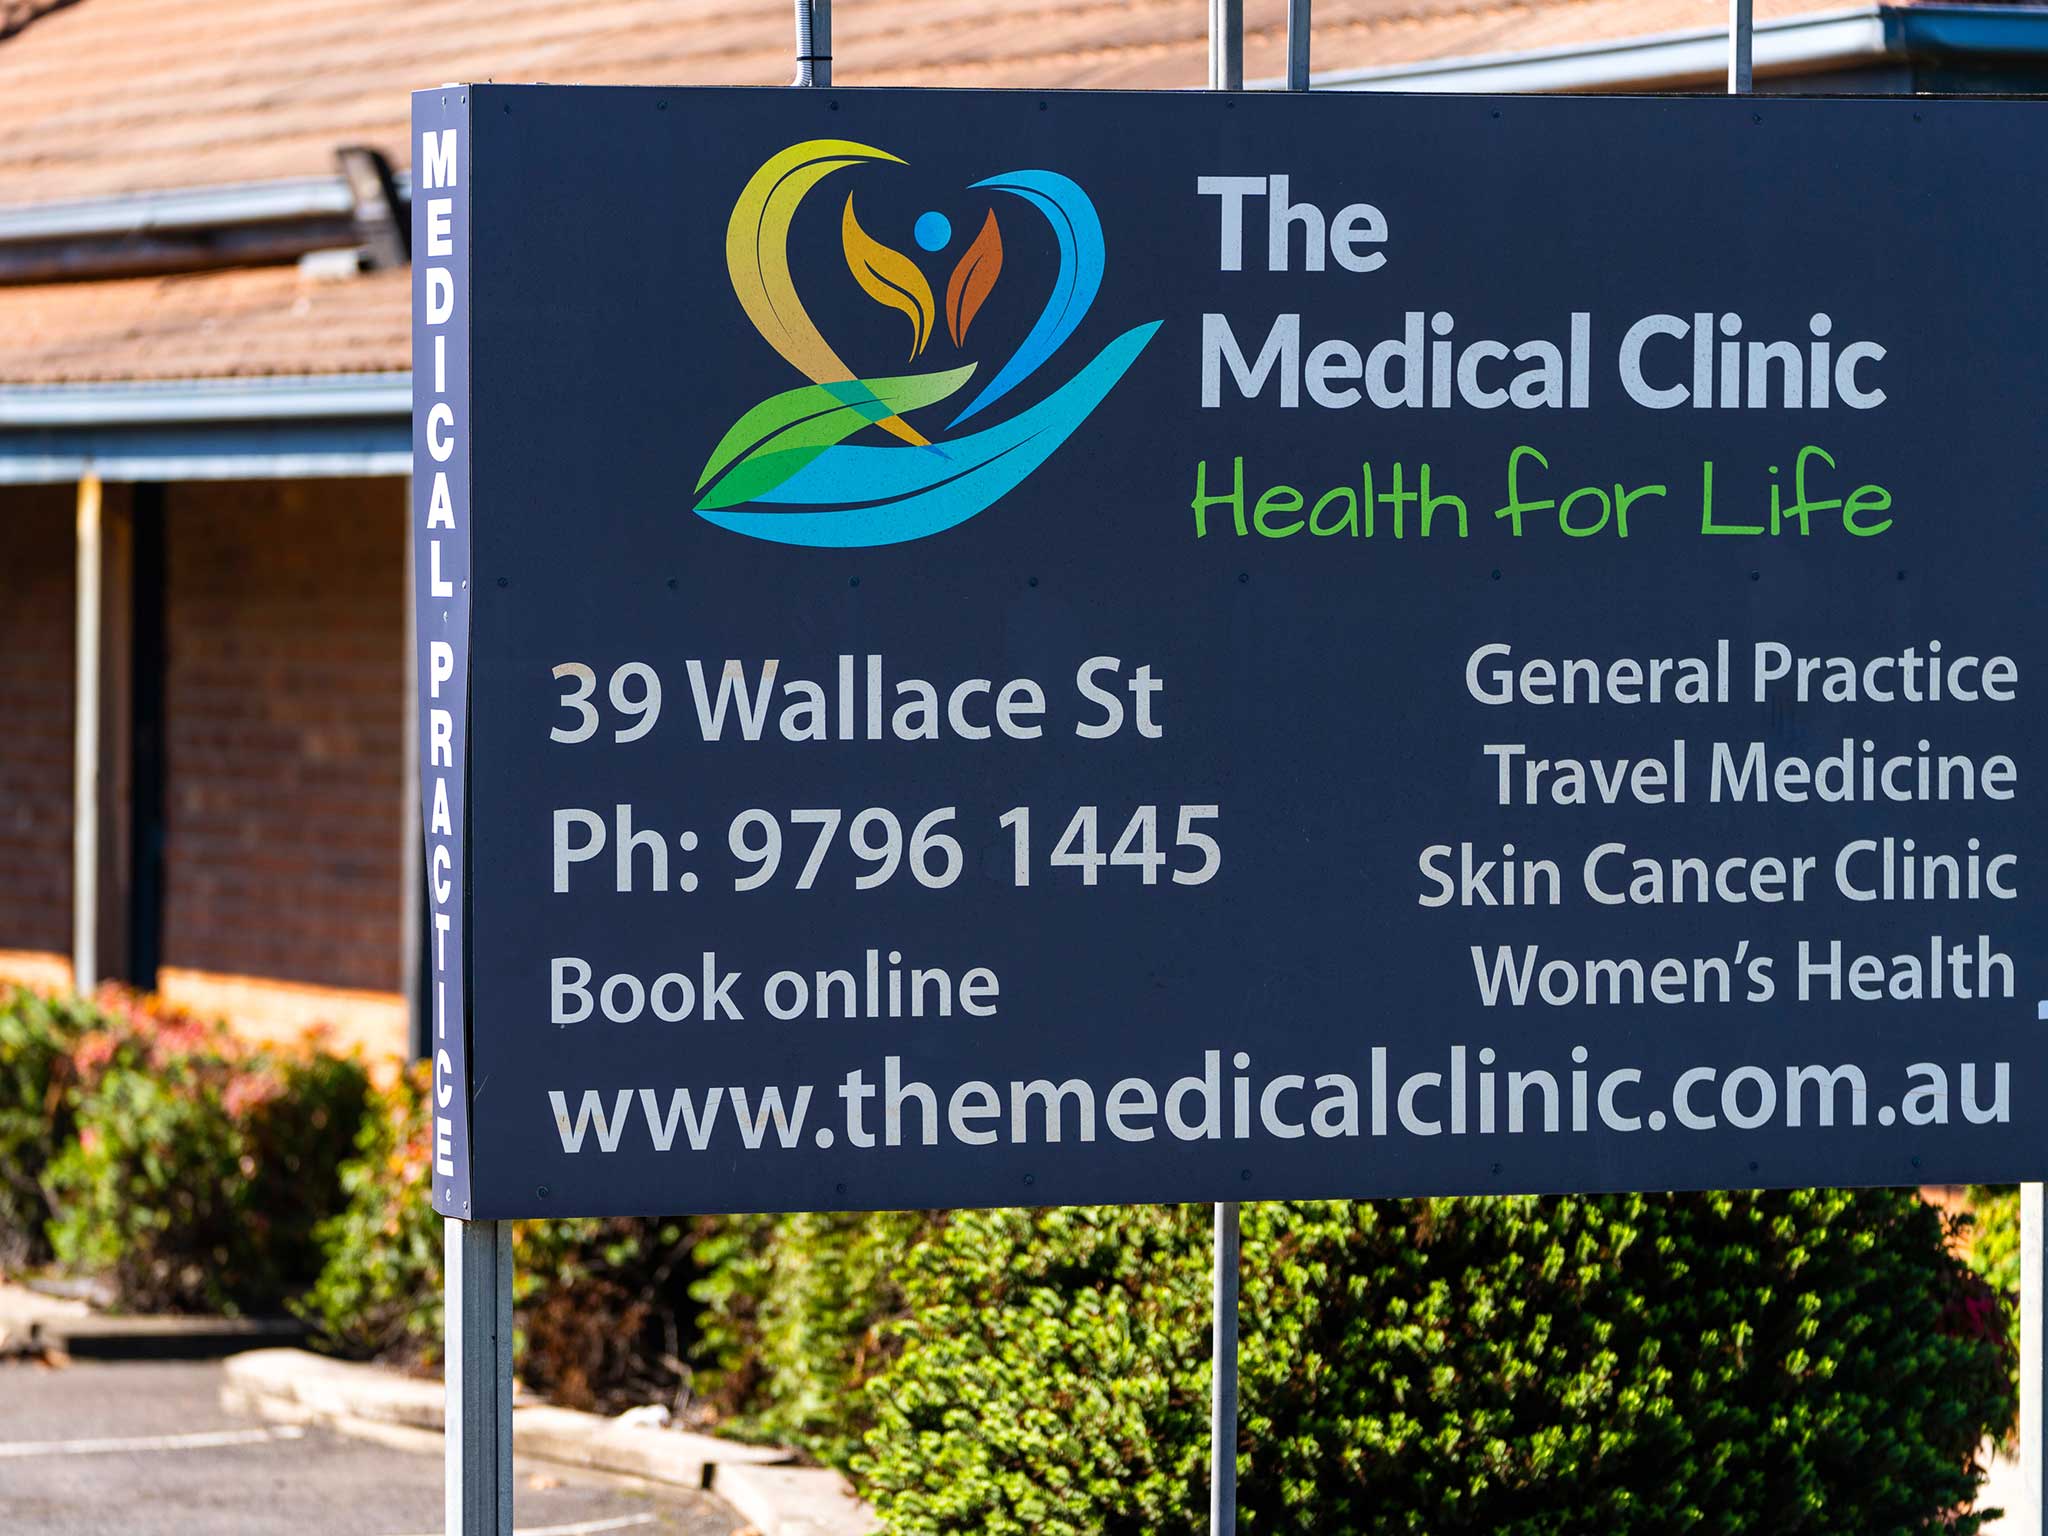 The Medical Clinic